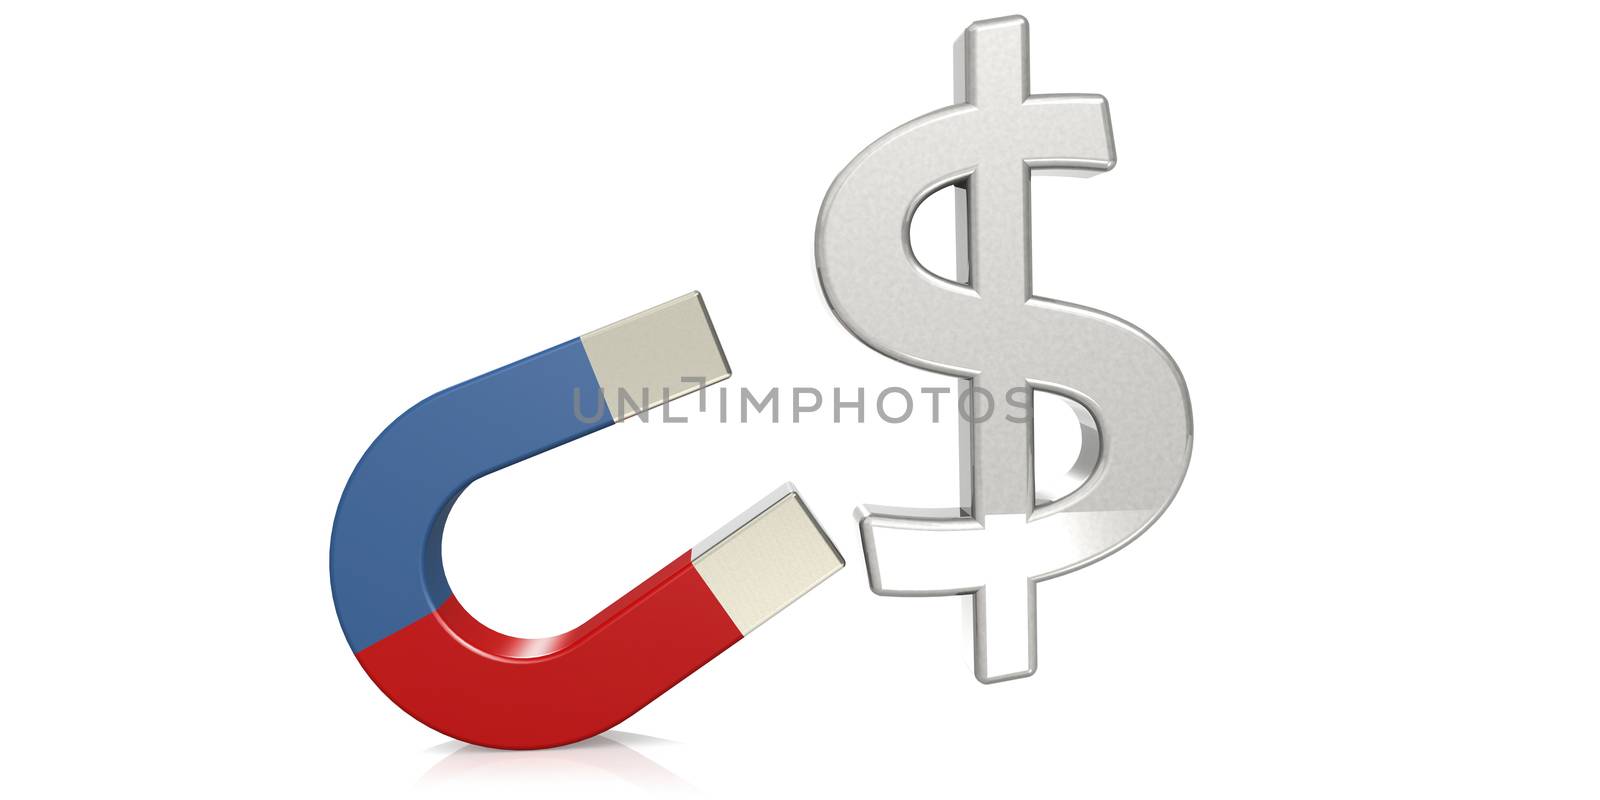 Horseshoe magnet attract dollar sign, 3D rendering